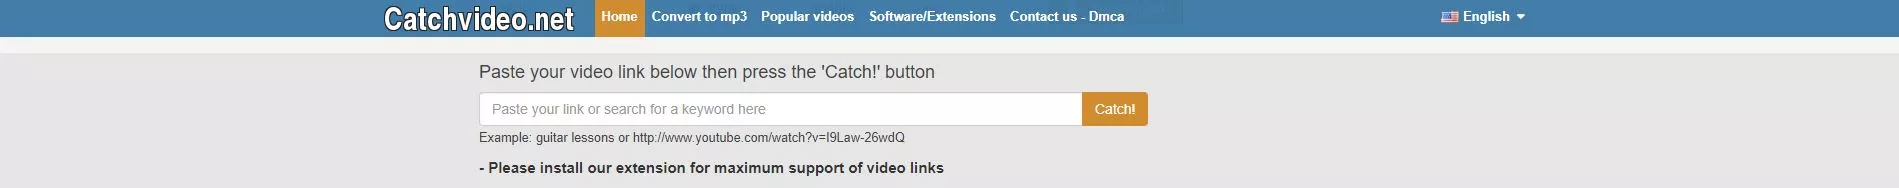 Catchvideo Download Dailymotion Videos